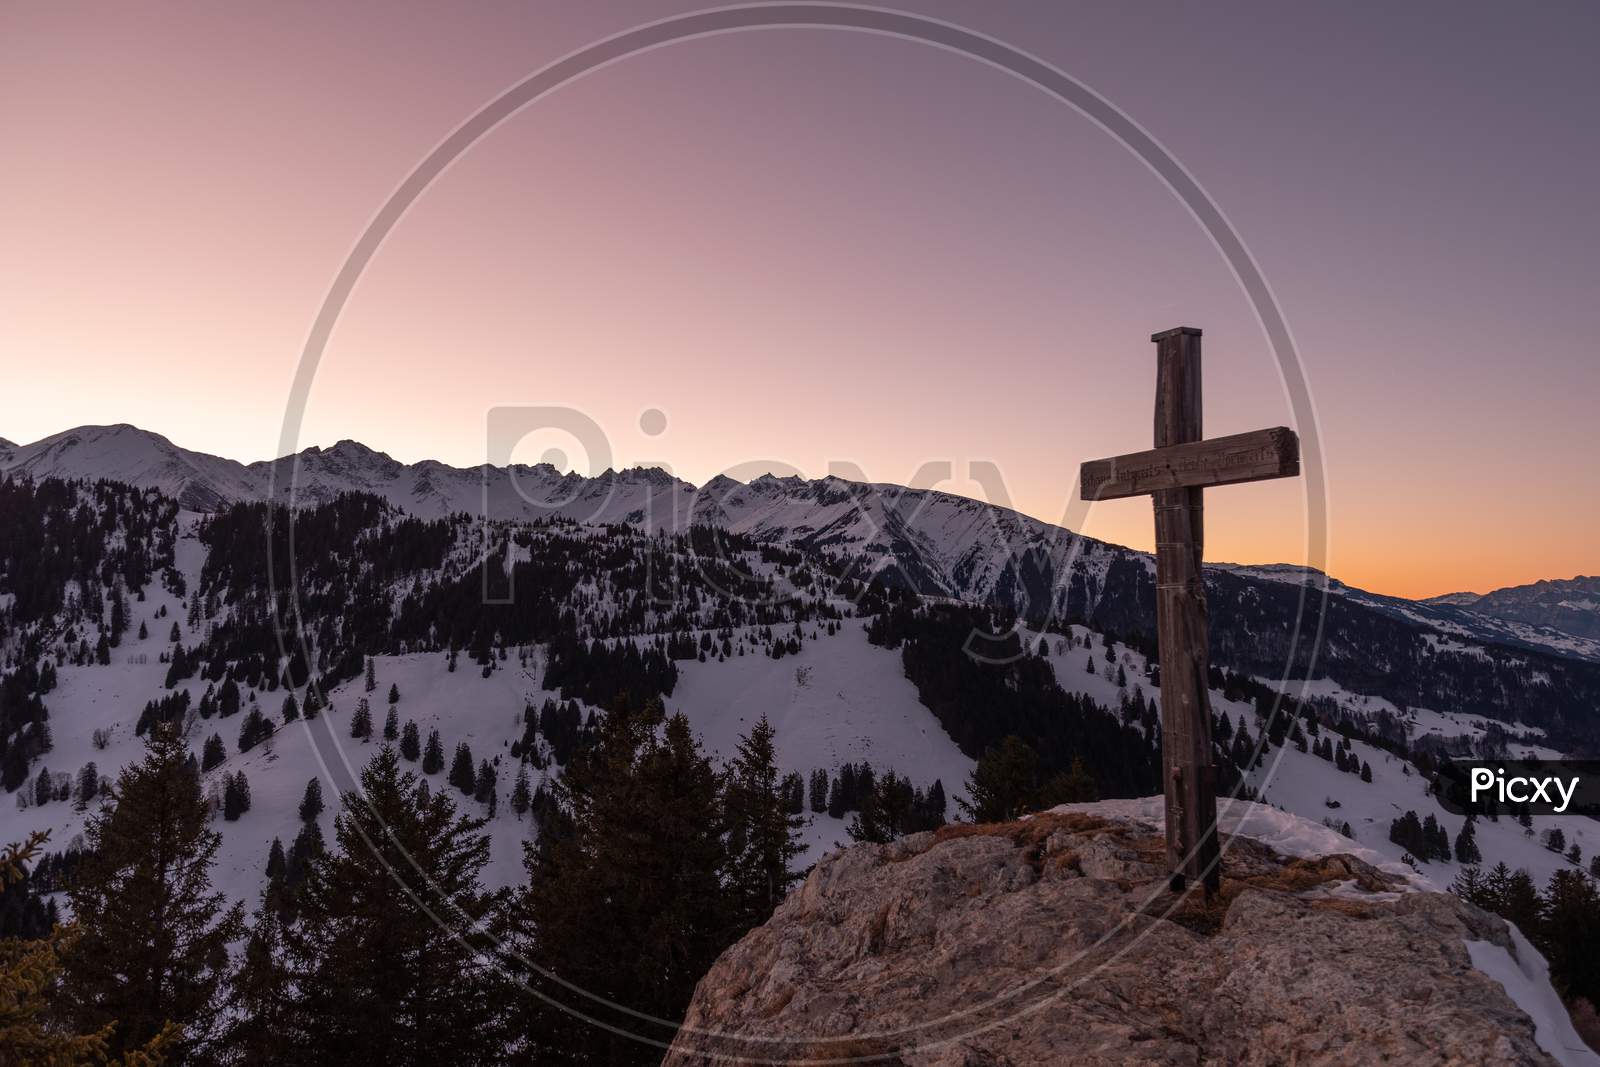 Landquart, Switzerland, December 19, 2021 Holy Cross On The Peak Of The Mount Pizalun In The Evening